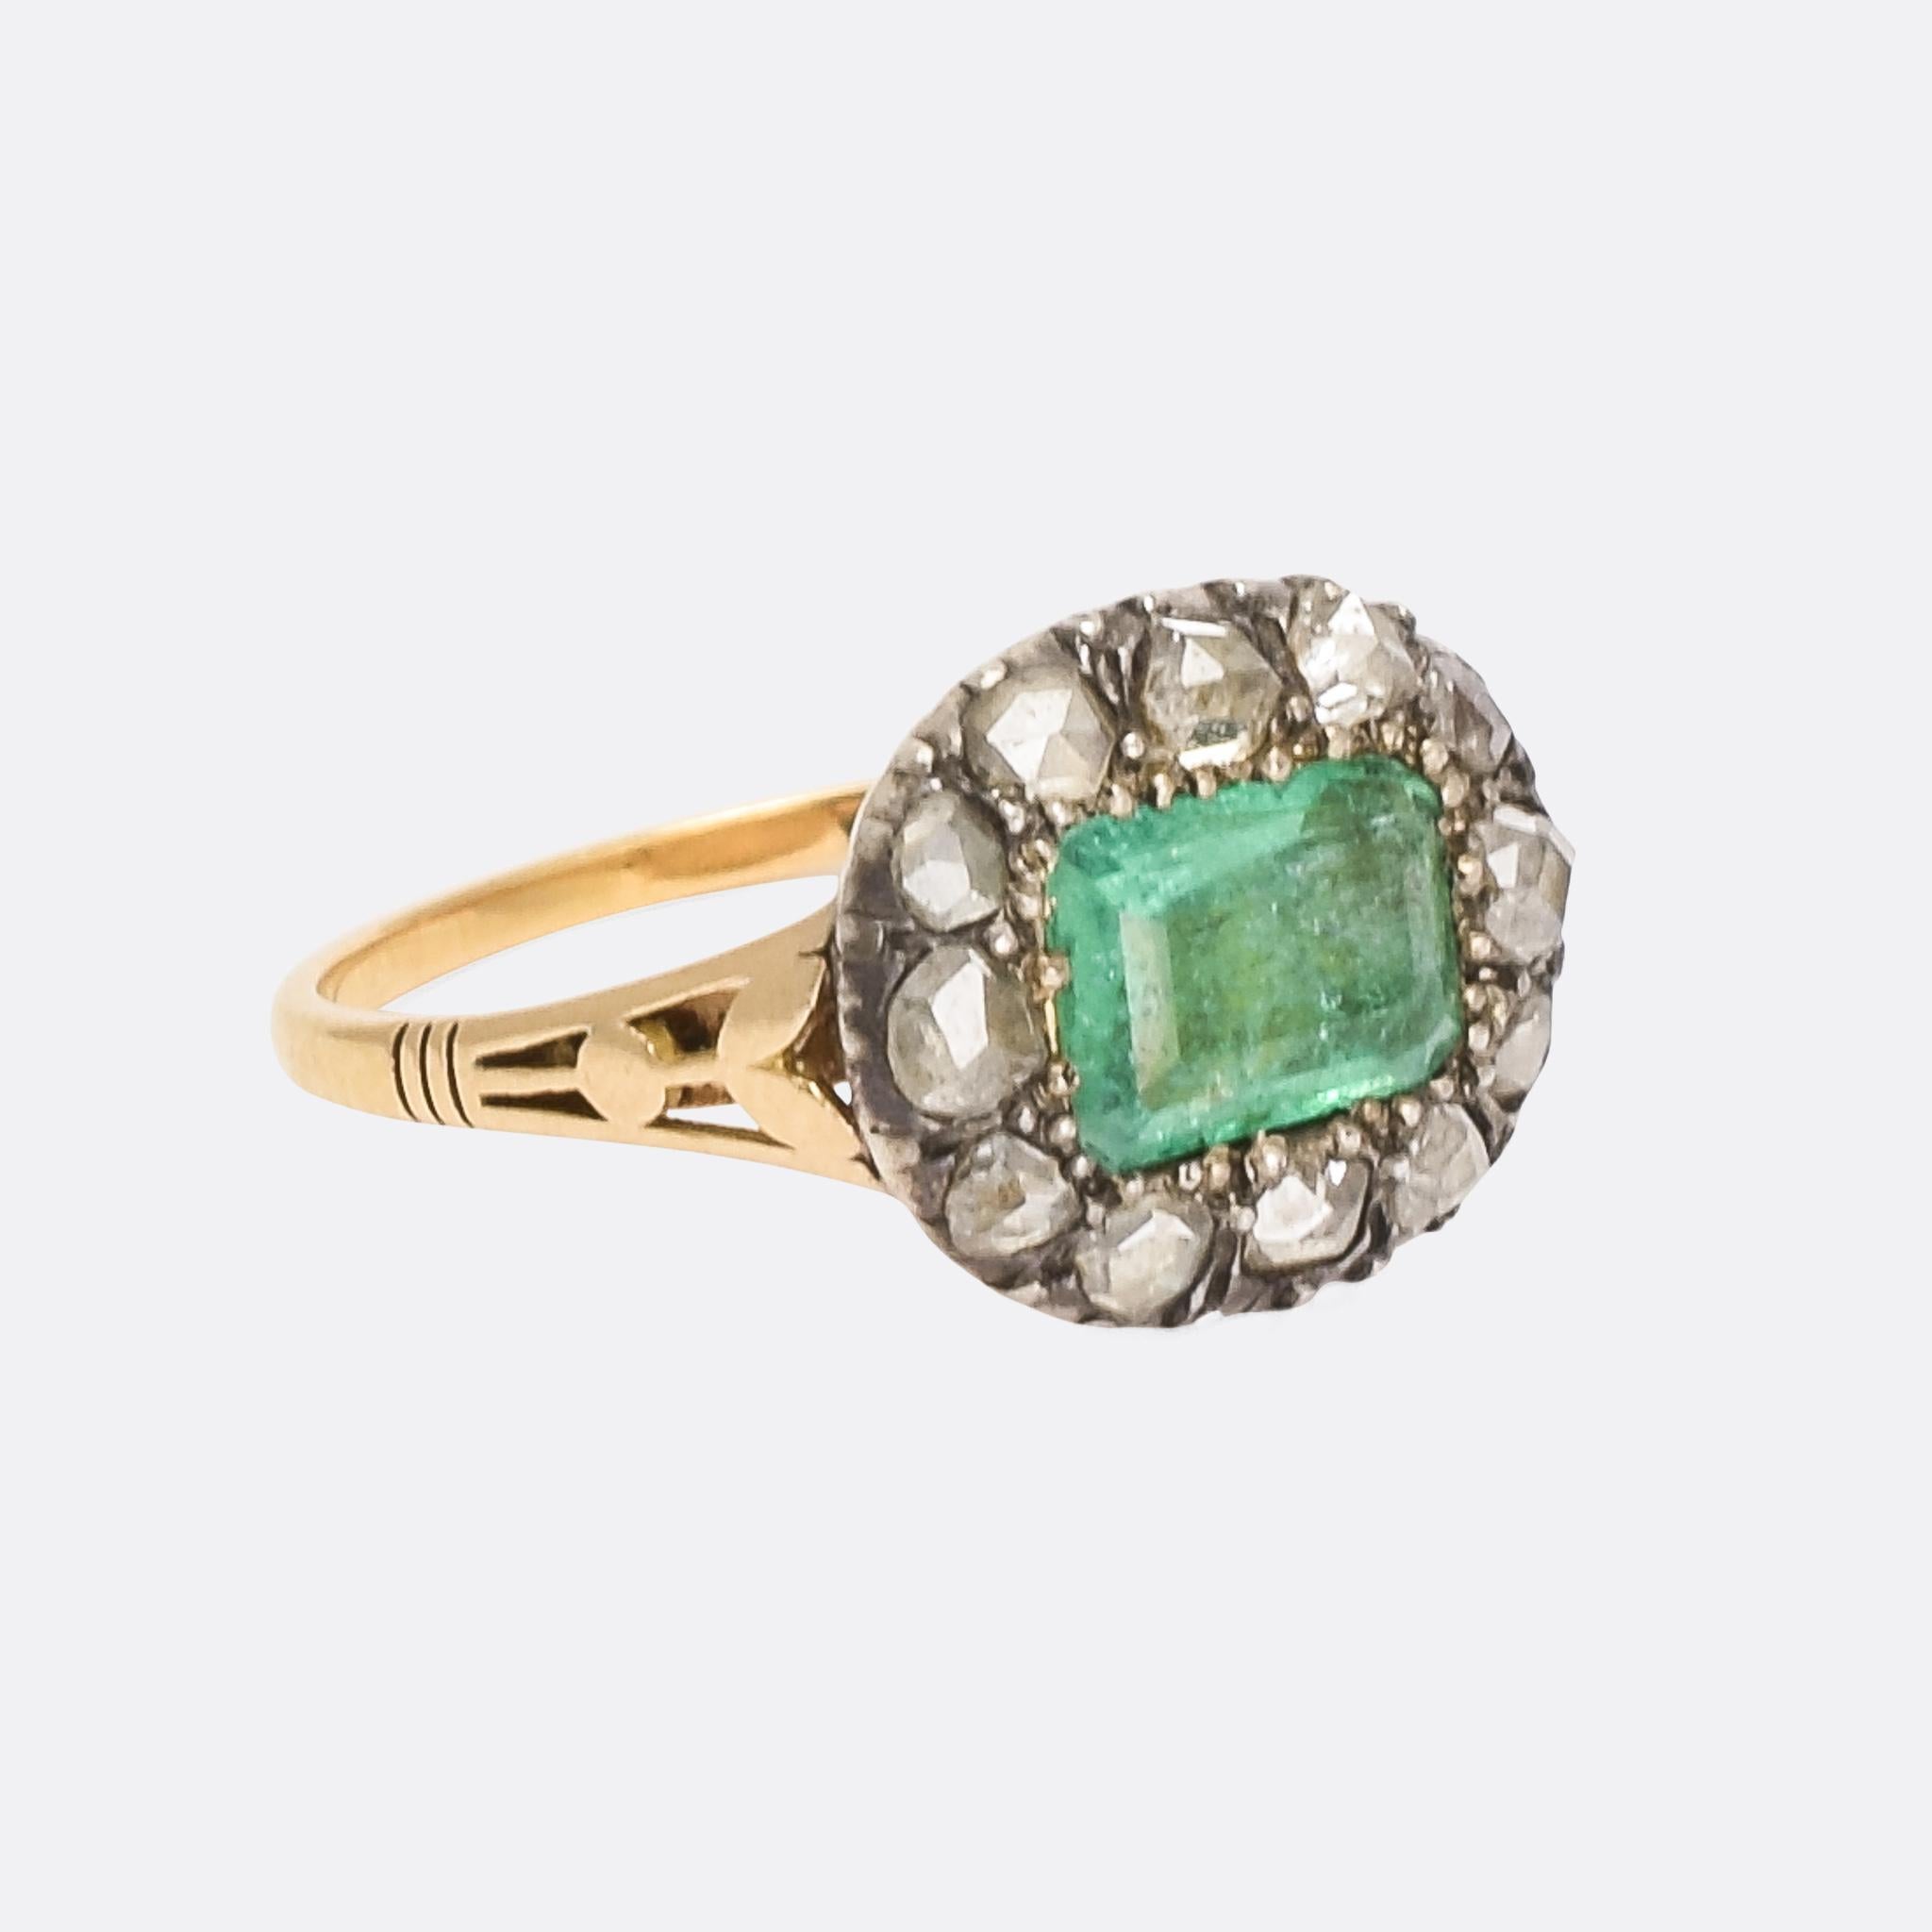 A superb 18th Century cluster ring set with a principal emerald within a halo of rose cut diamonds. It was made in England – circa 1790 – under the reign of George III. Crafted in 15 karat gold with silver settings, the ring features fluted